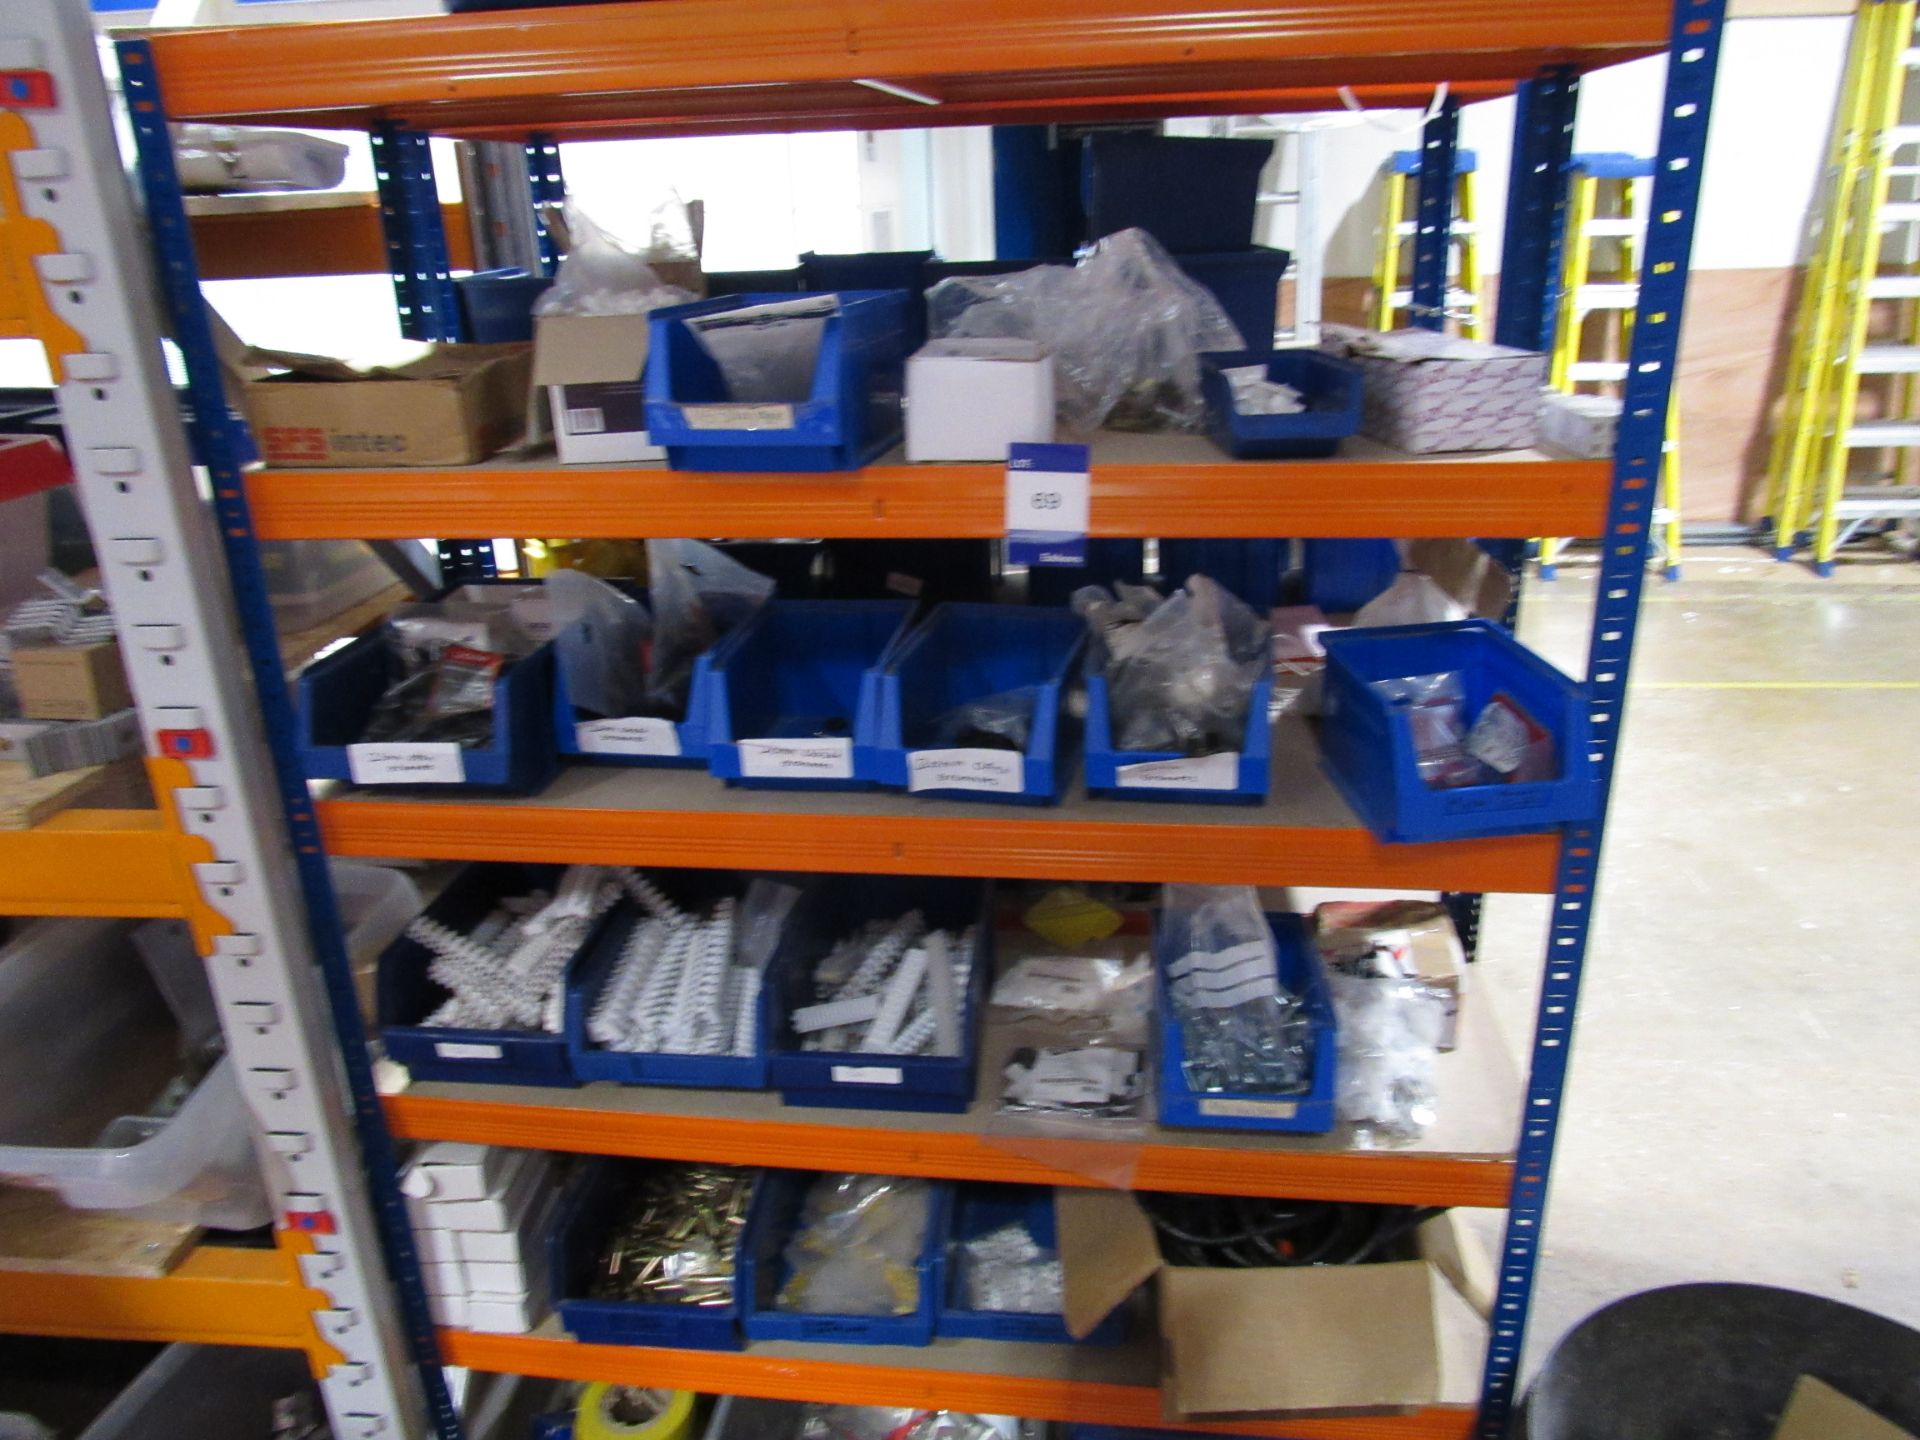 Single bay boltless shelving and contents grommets, conduits etc